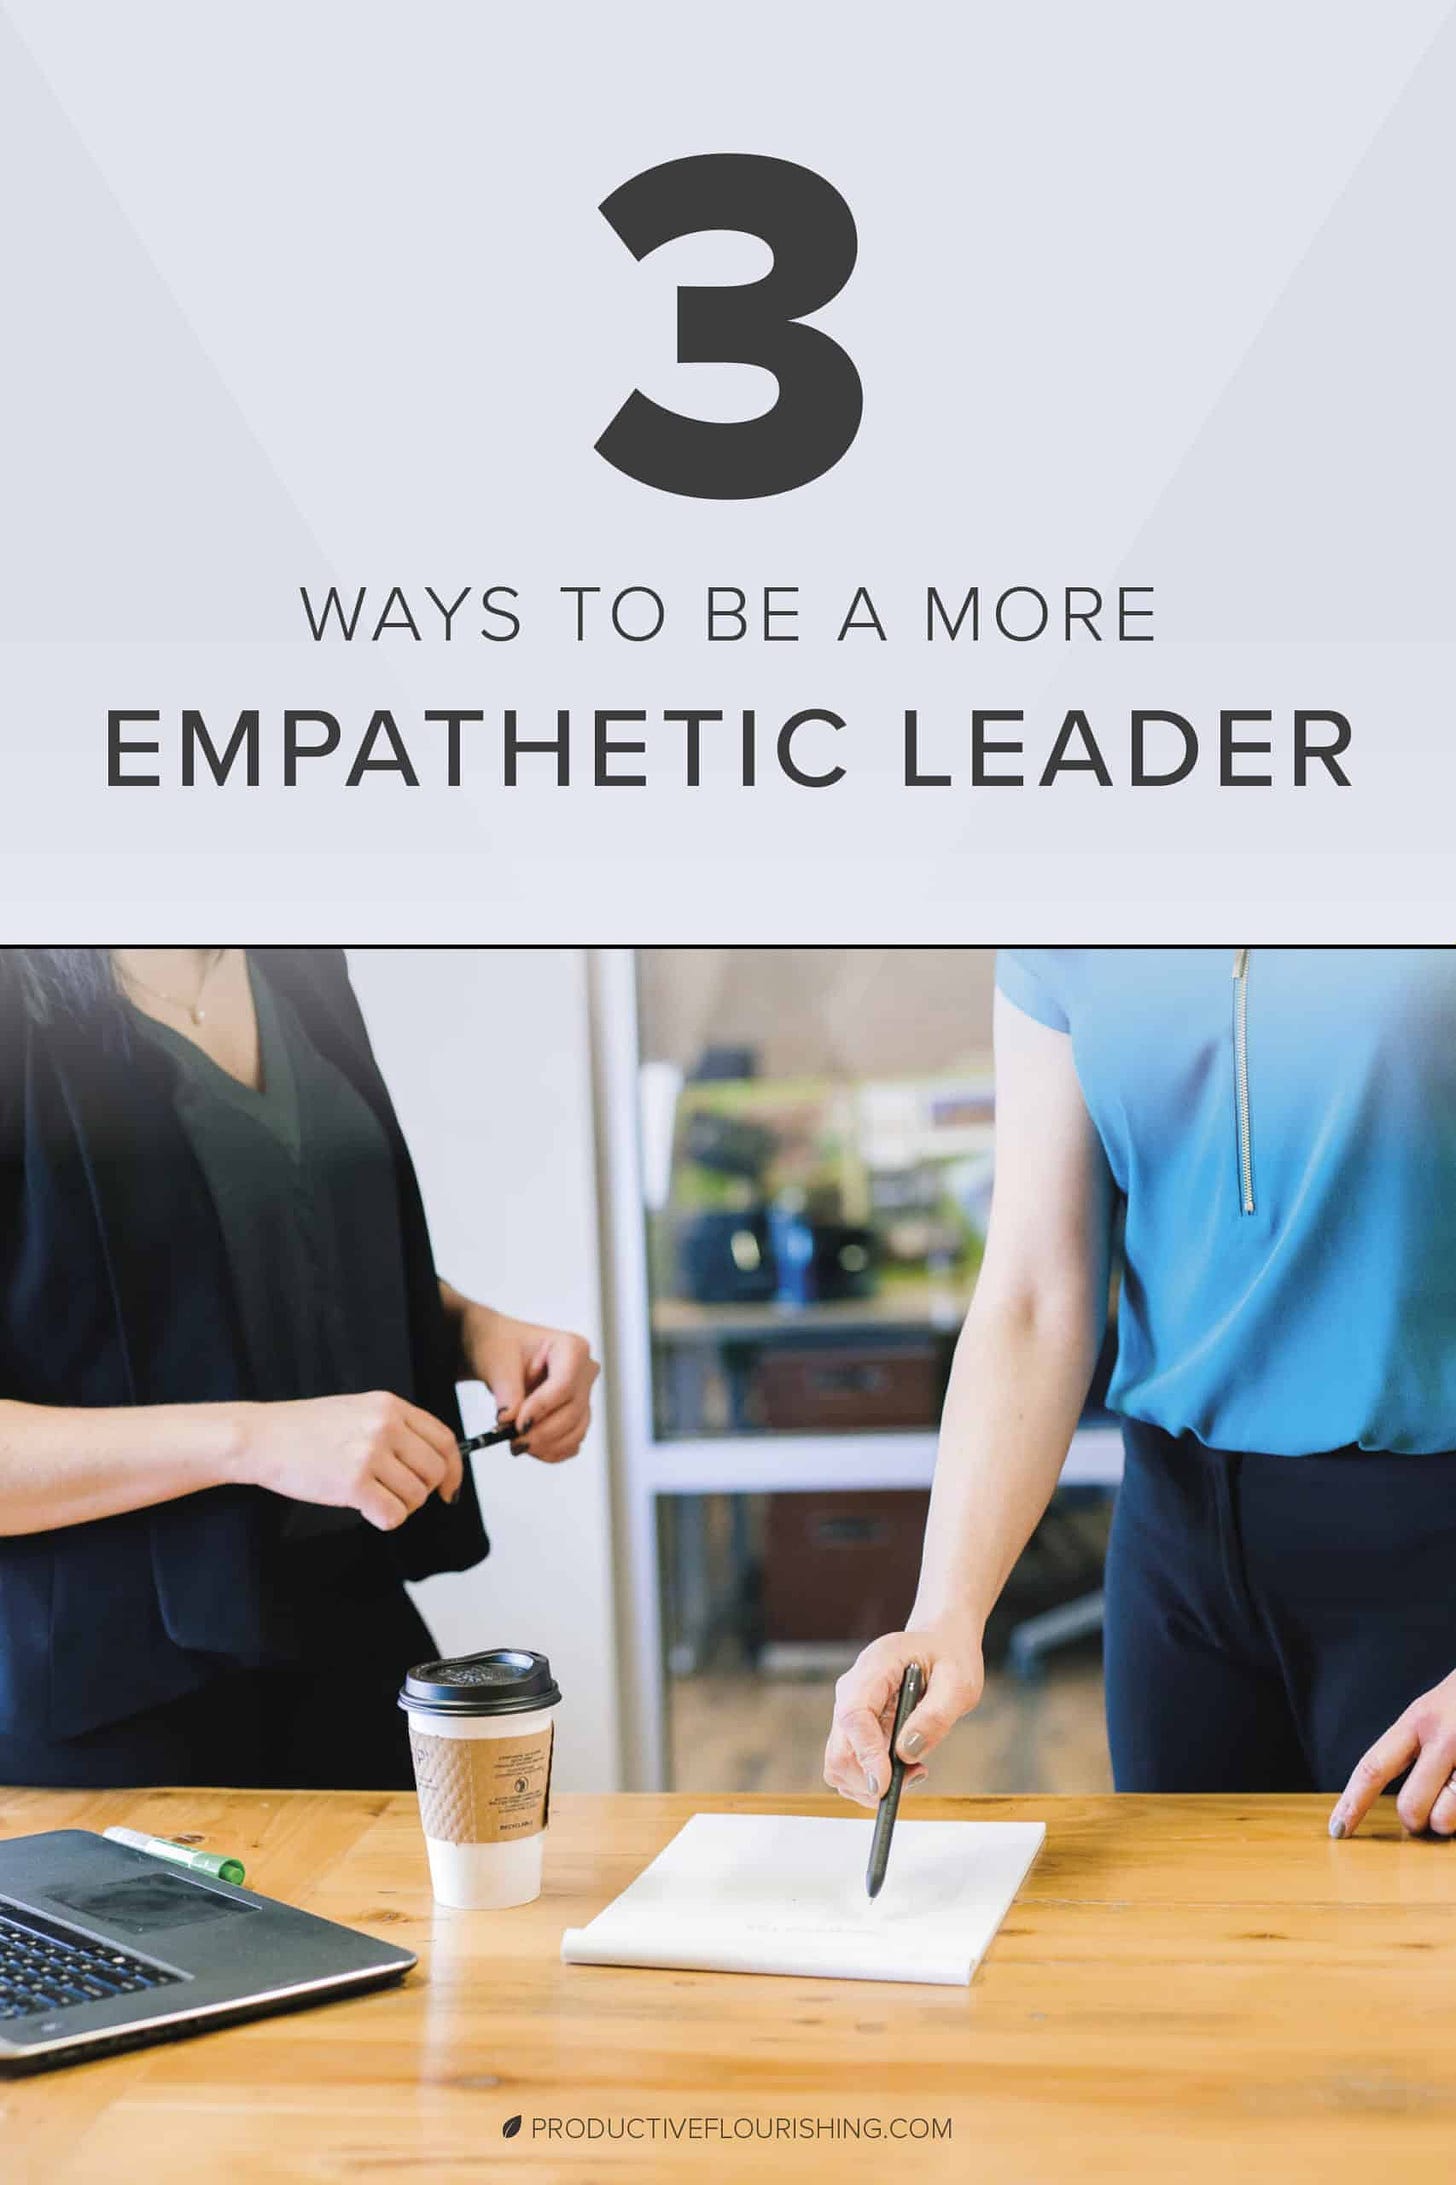 Learn How to Be a More Empathetic Leader. Having a few Empathetic Leader techniques in your back pocket as an entrepreneur will help you avoid reactive problem-solving and preserve relationships with coworkers, team members, and collaborators. Learn how leading with empathy makes you a better leader and leads to favorable results in your small business. #leadershipskills #entrepreneurship #productiveflourishing